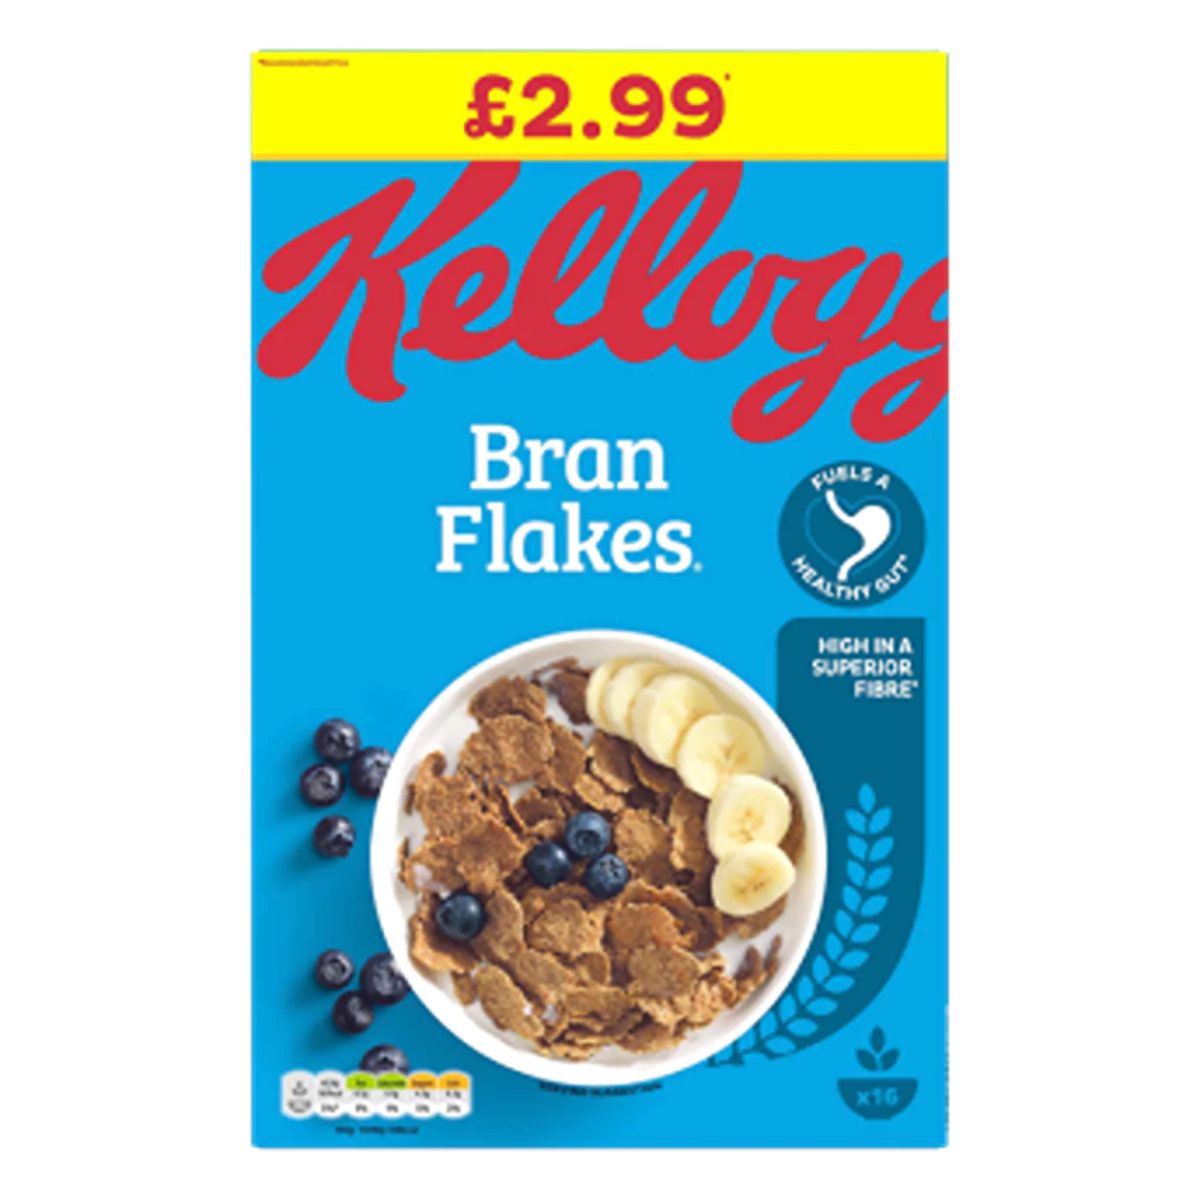 A box of Kelloggs - Bran Flakes Cereal - 500g with a price tag of £2.99, depicting the cereal with bananas and blueberries in a bowl.